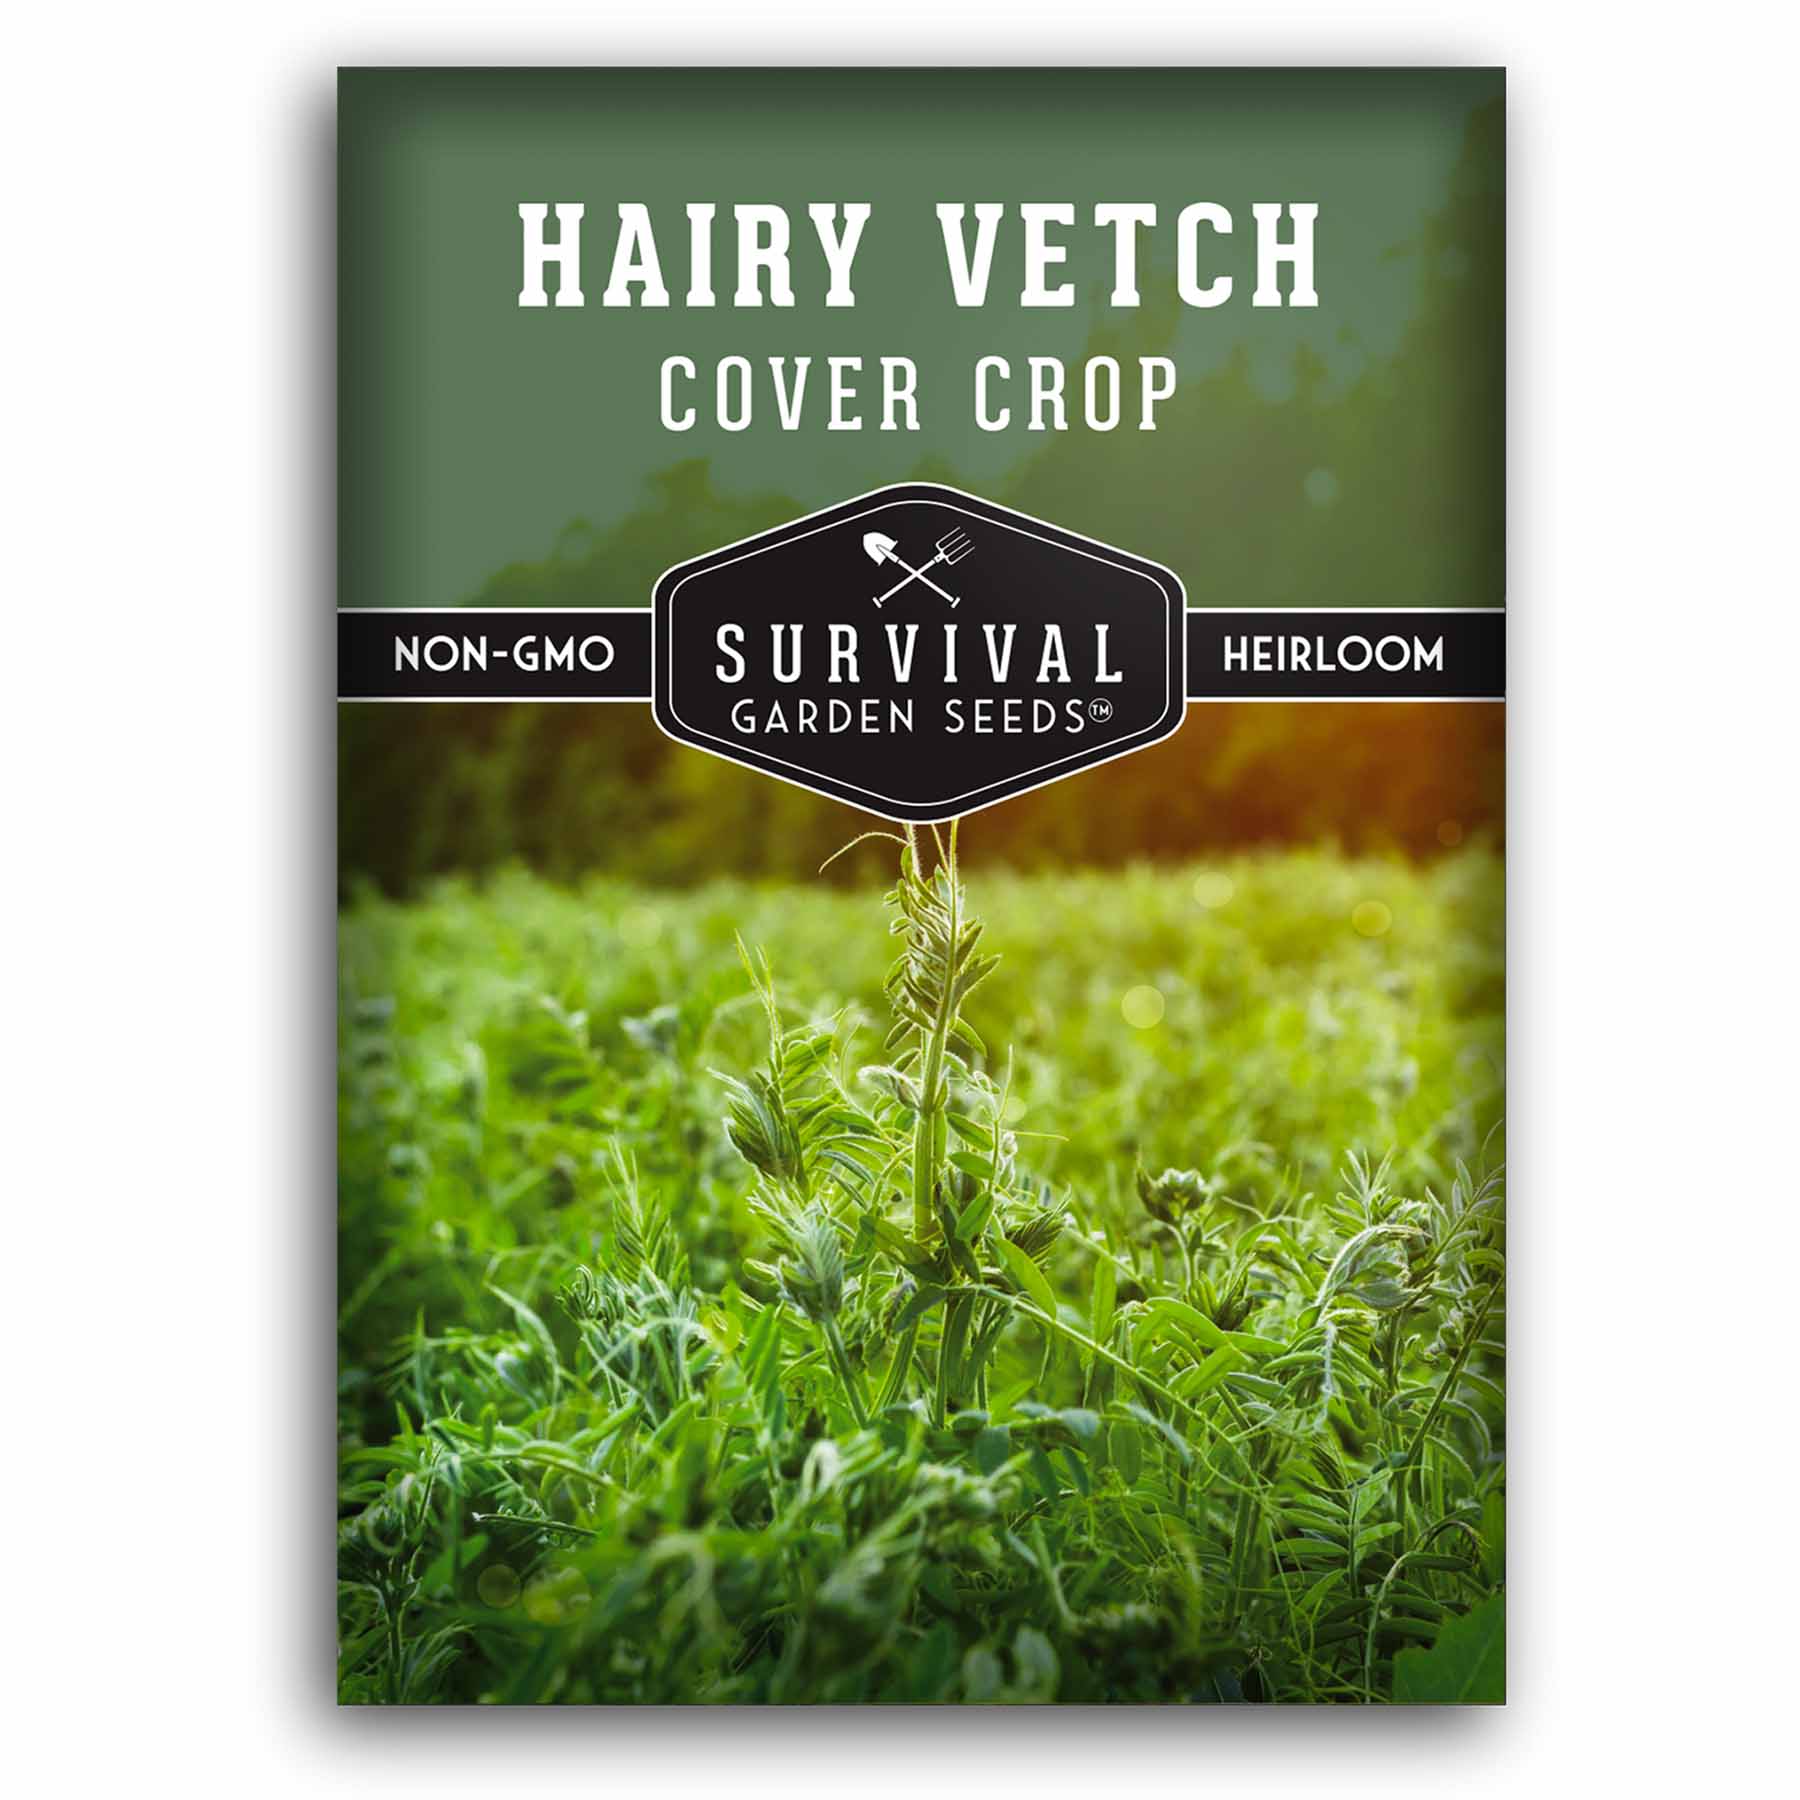 1 packet of Hairy Vetch seeds